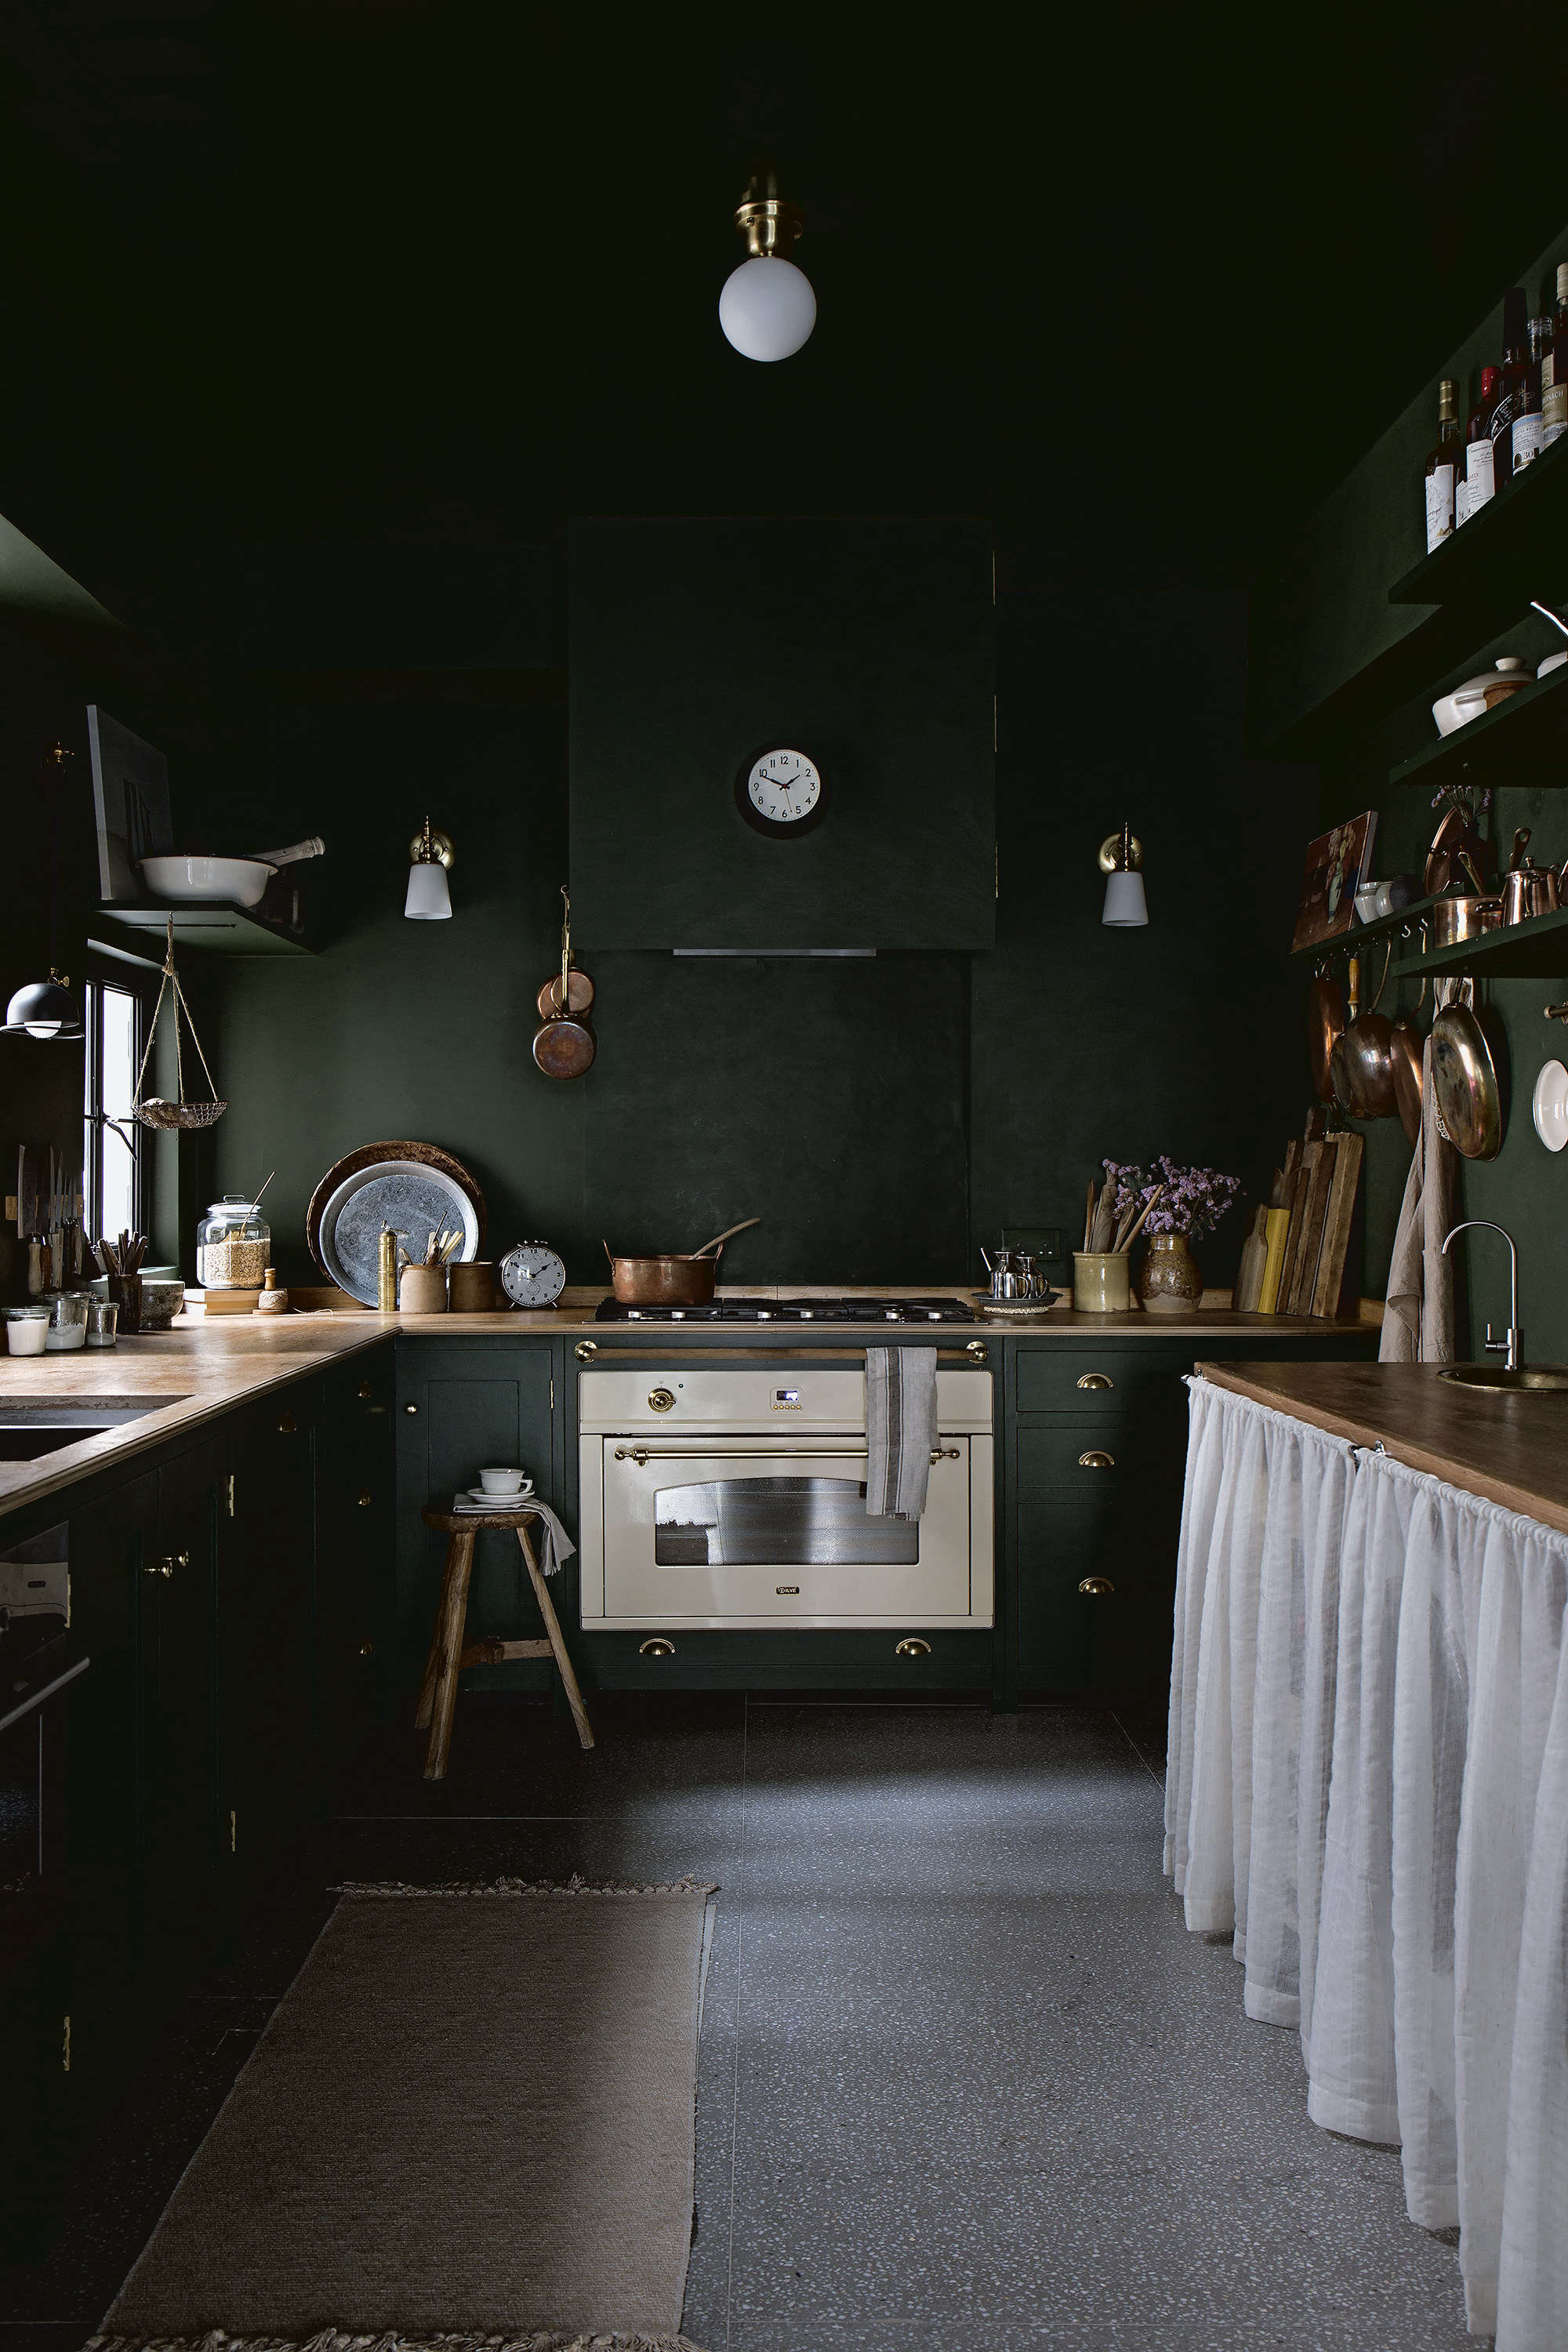 Kitchen of the Week: The 'Angry Food Blogger' at Home in Hong Kong -  Remodelista